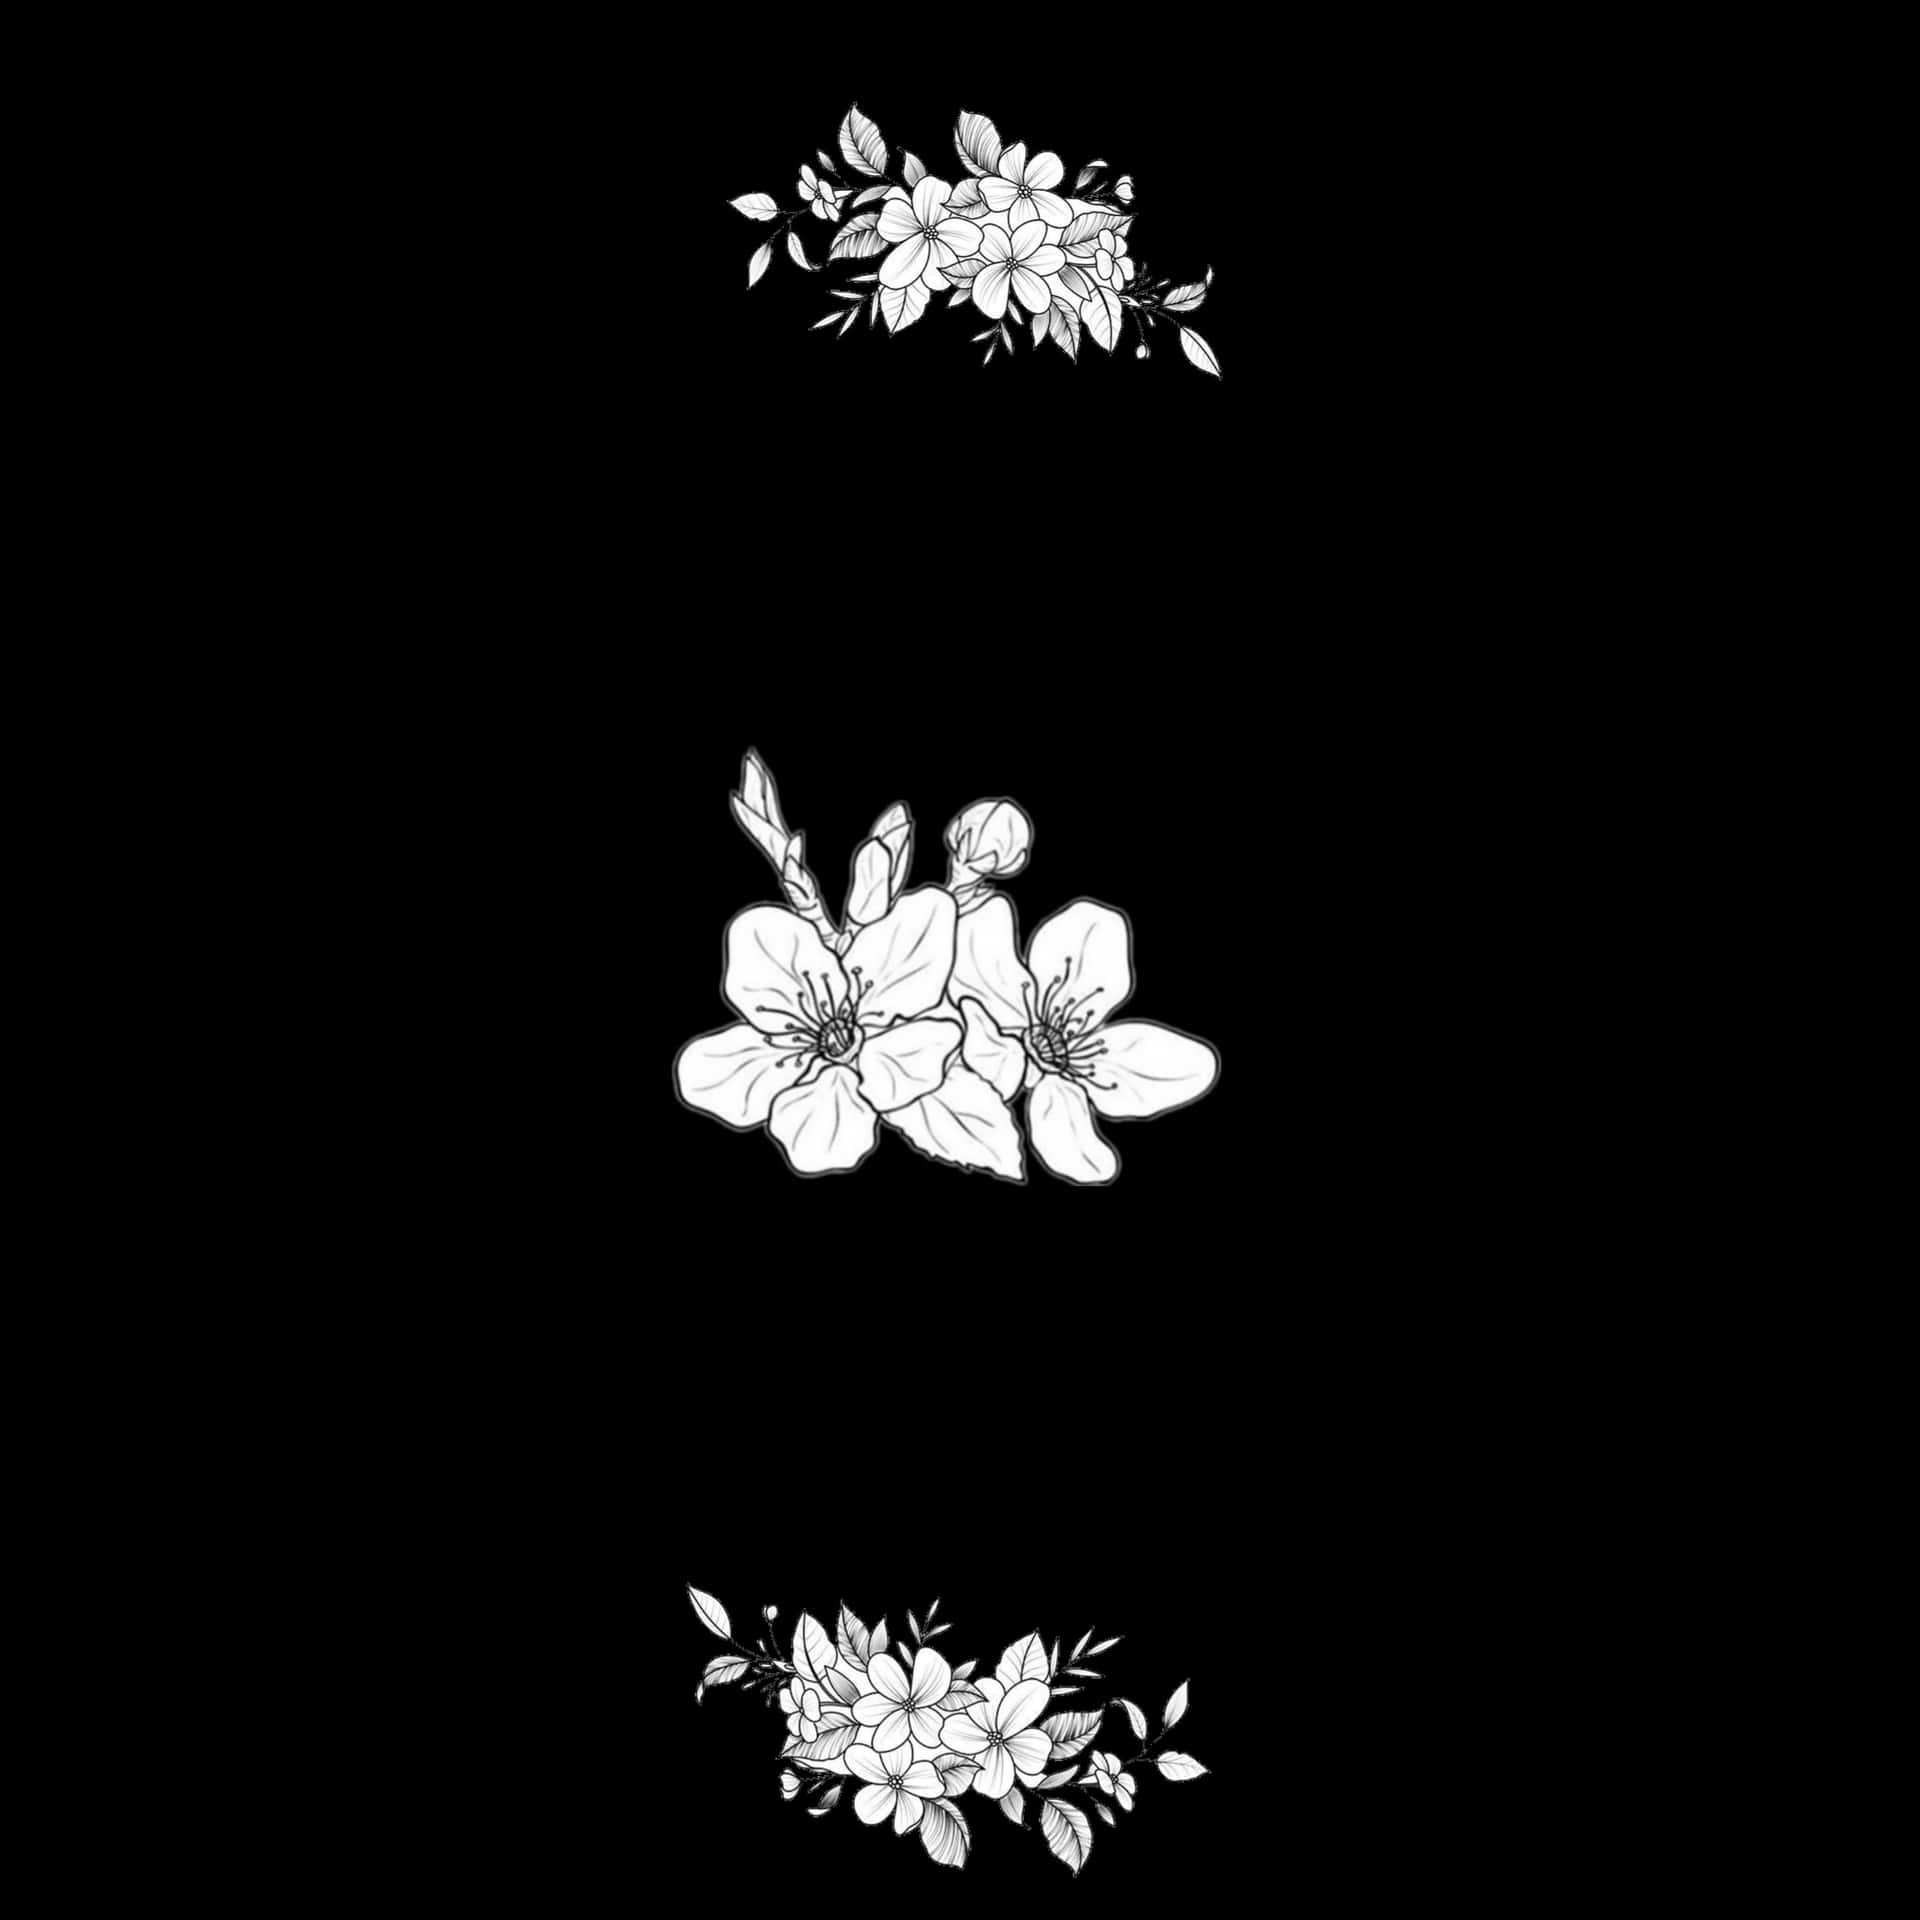 A Black Background With White Flowers On It